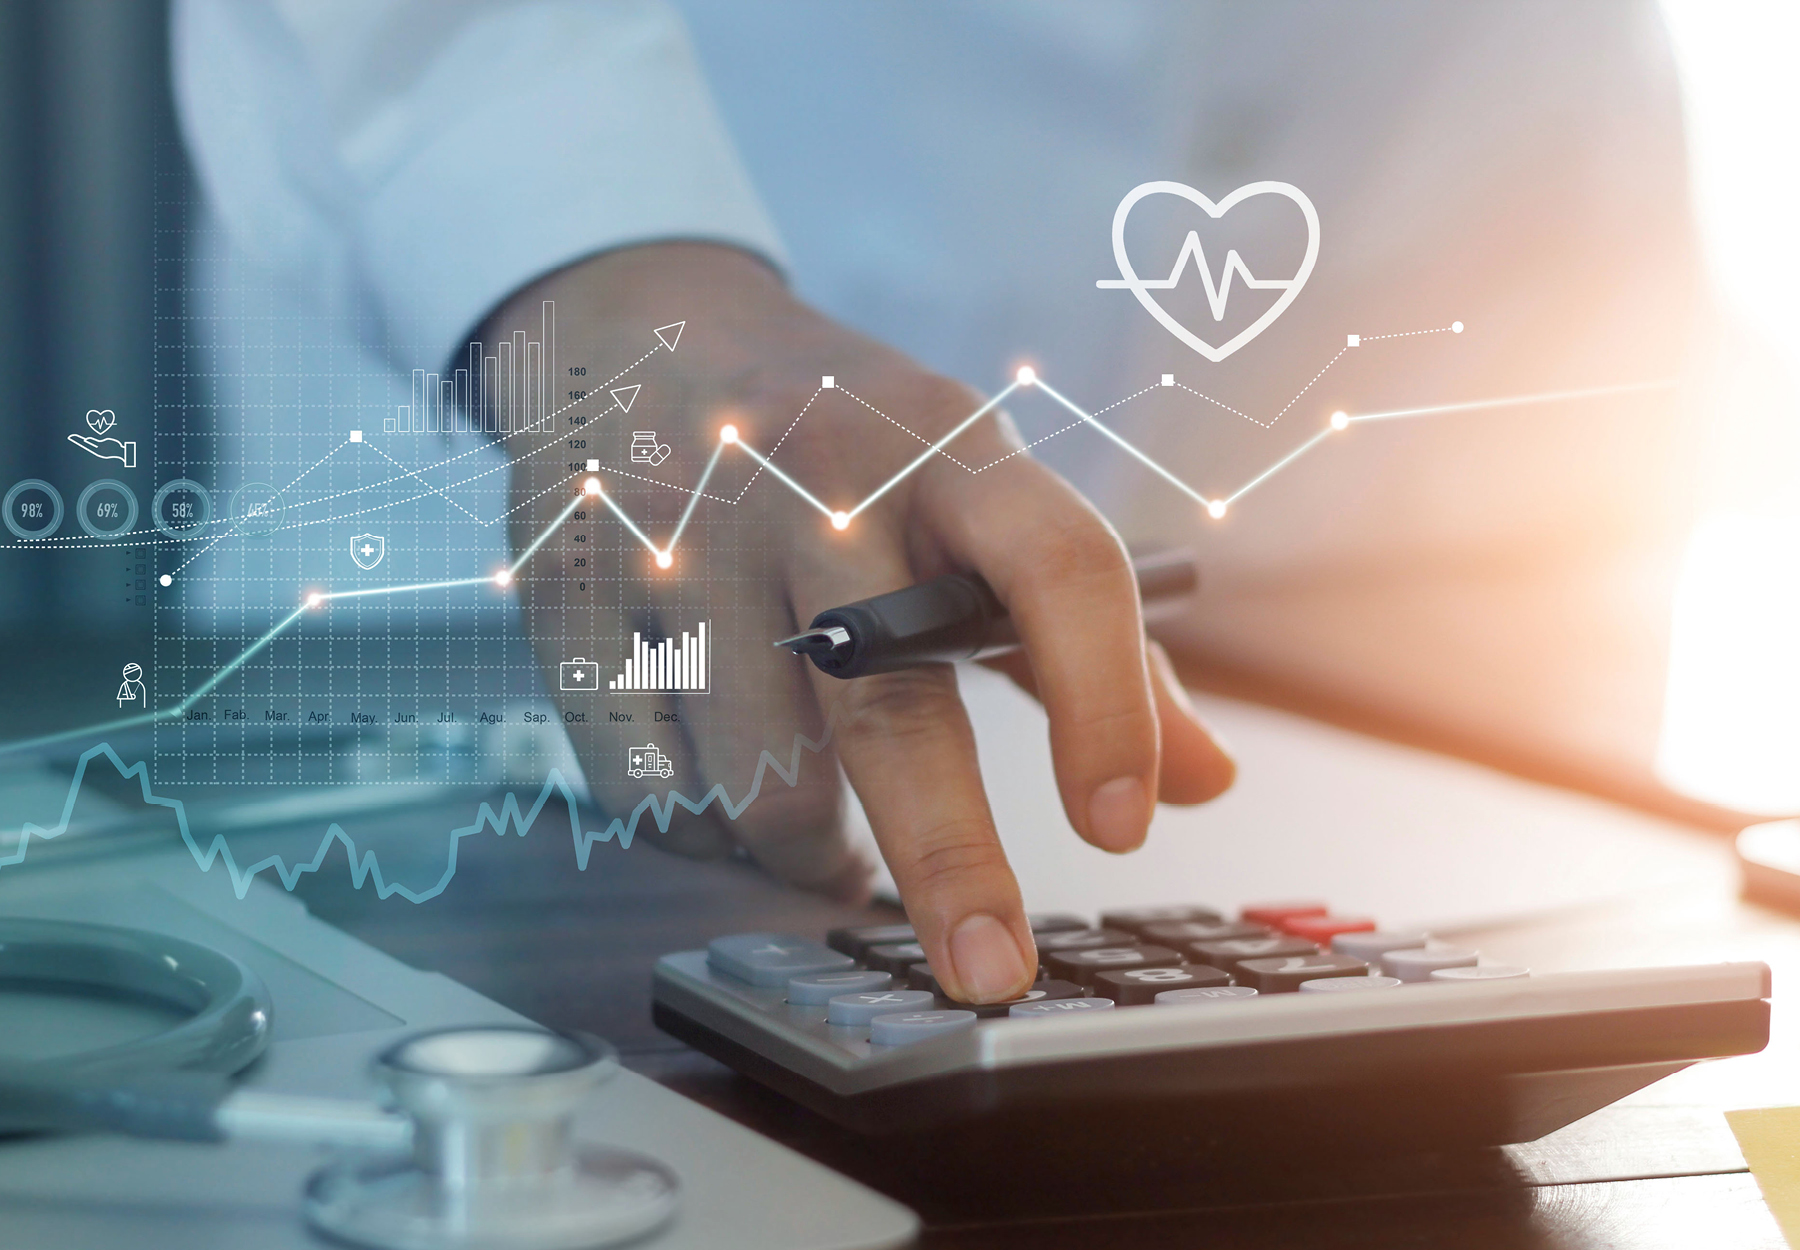 Closeup of healthcare professional using a calculator with graphics showing healthcare business graph data and growth. Stock photo illustration.